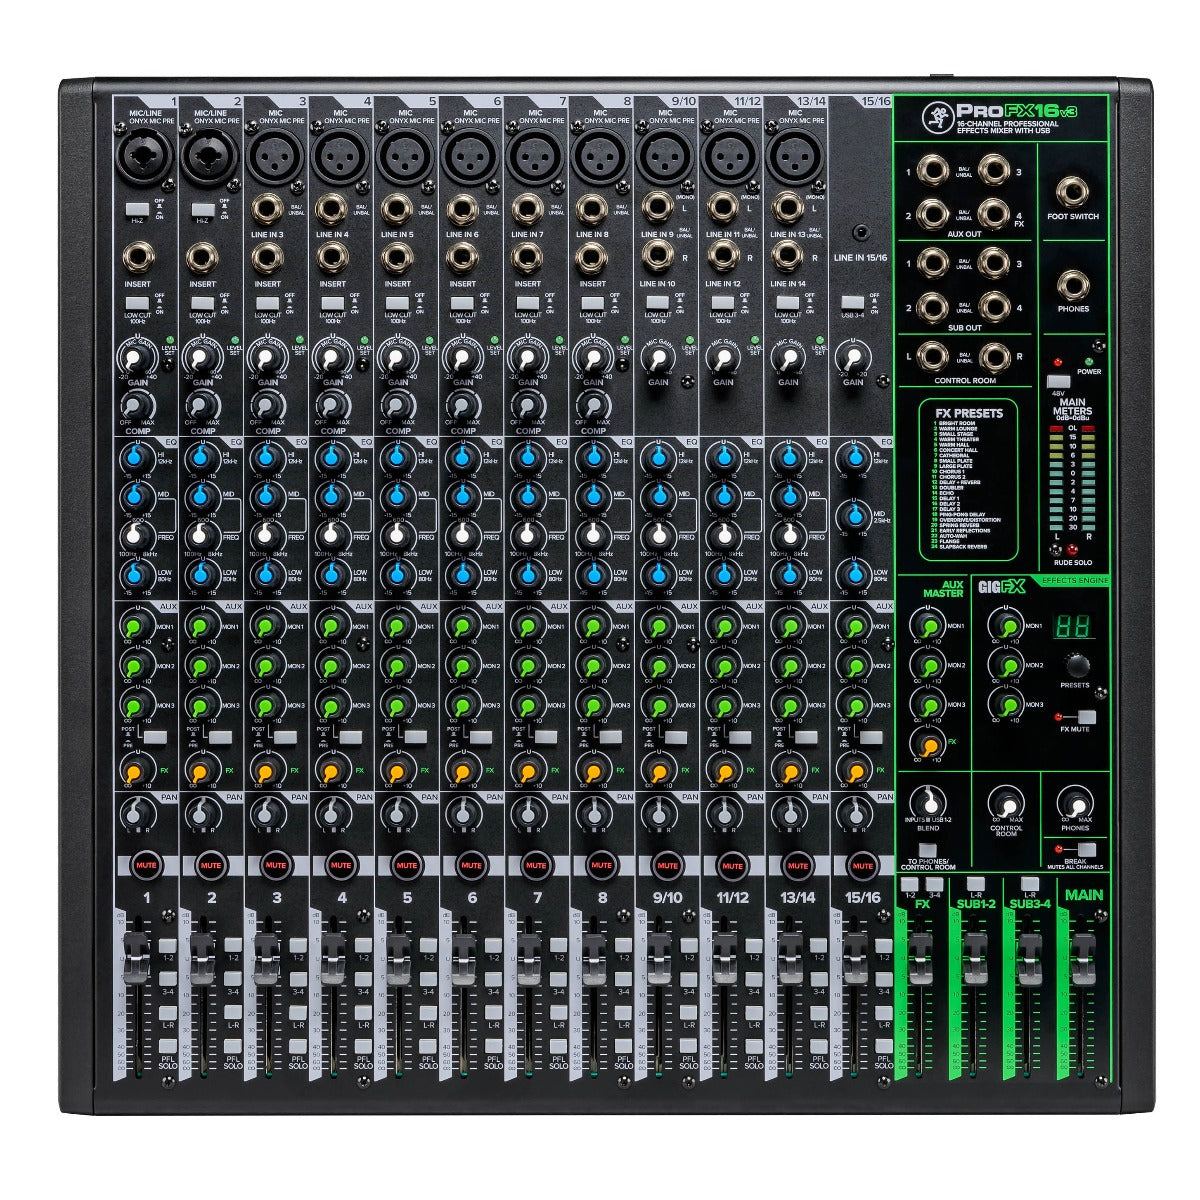 Top view of  Mackie ProFX16v3 Effects Mixer with USB